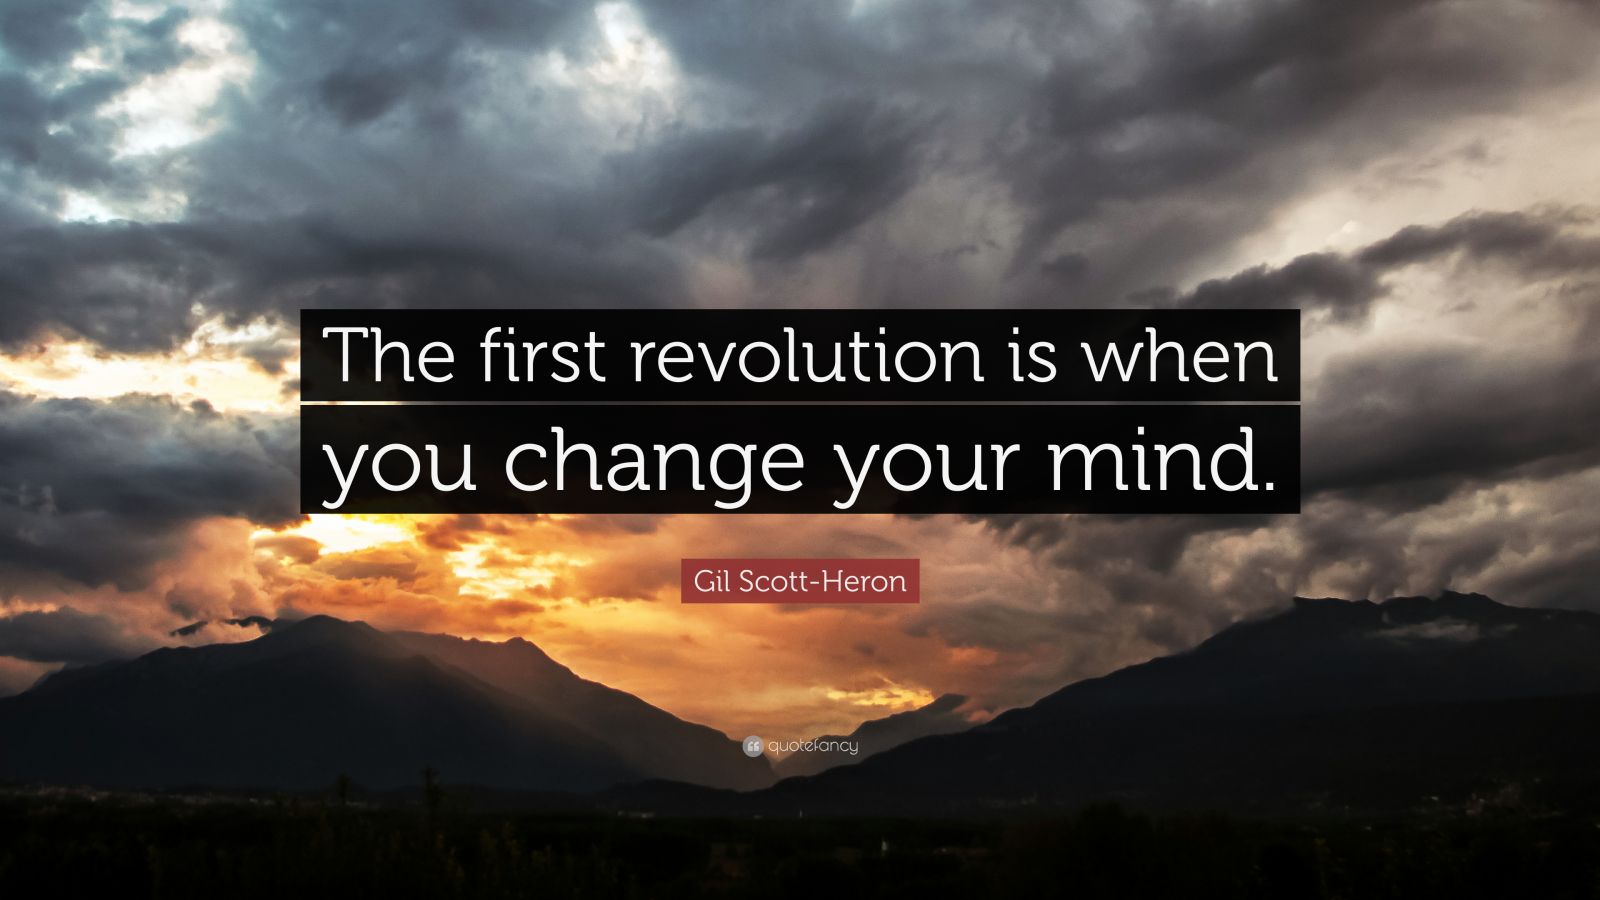 Gil Scott-Heron Quote: “The first revolution is when you change your ...